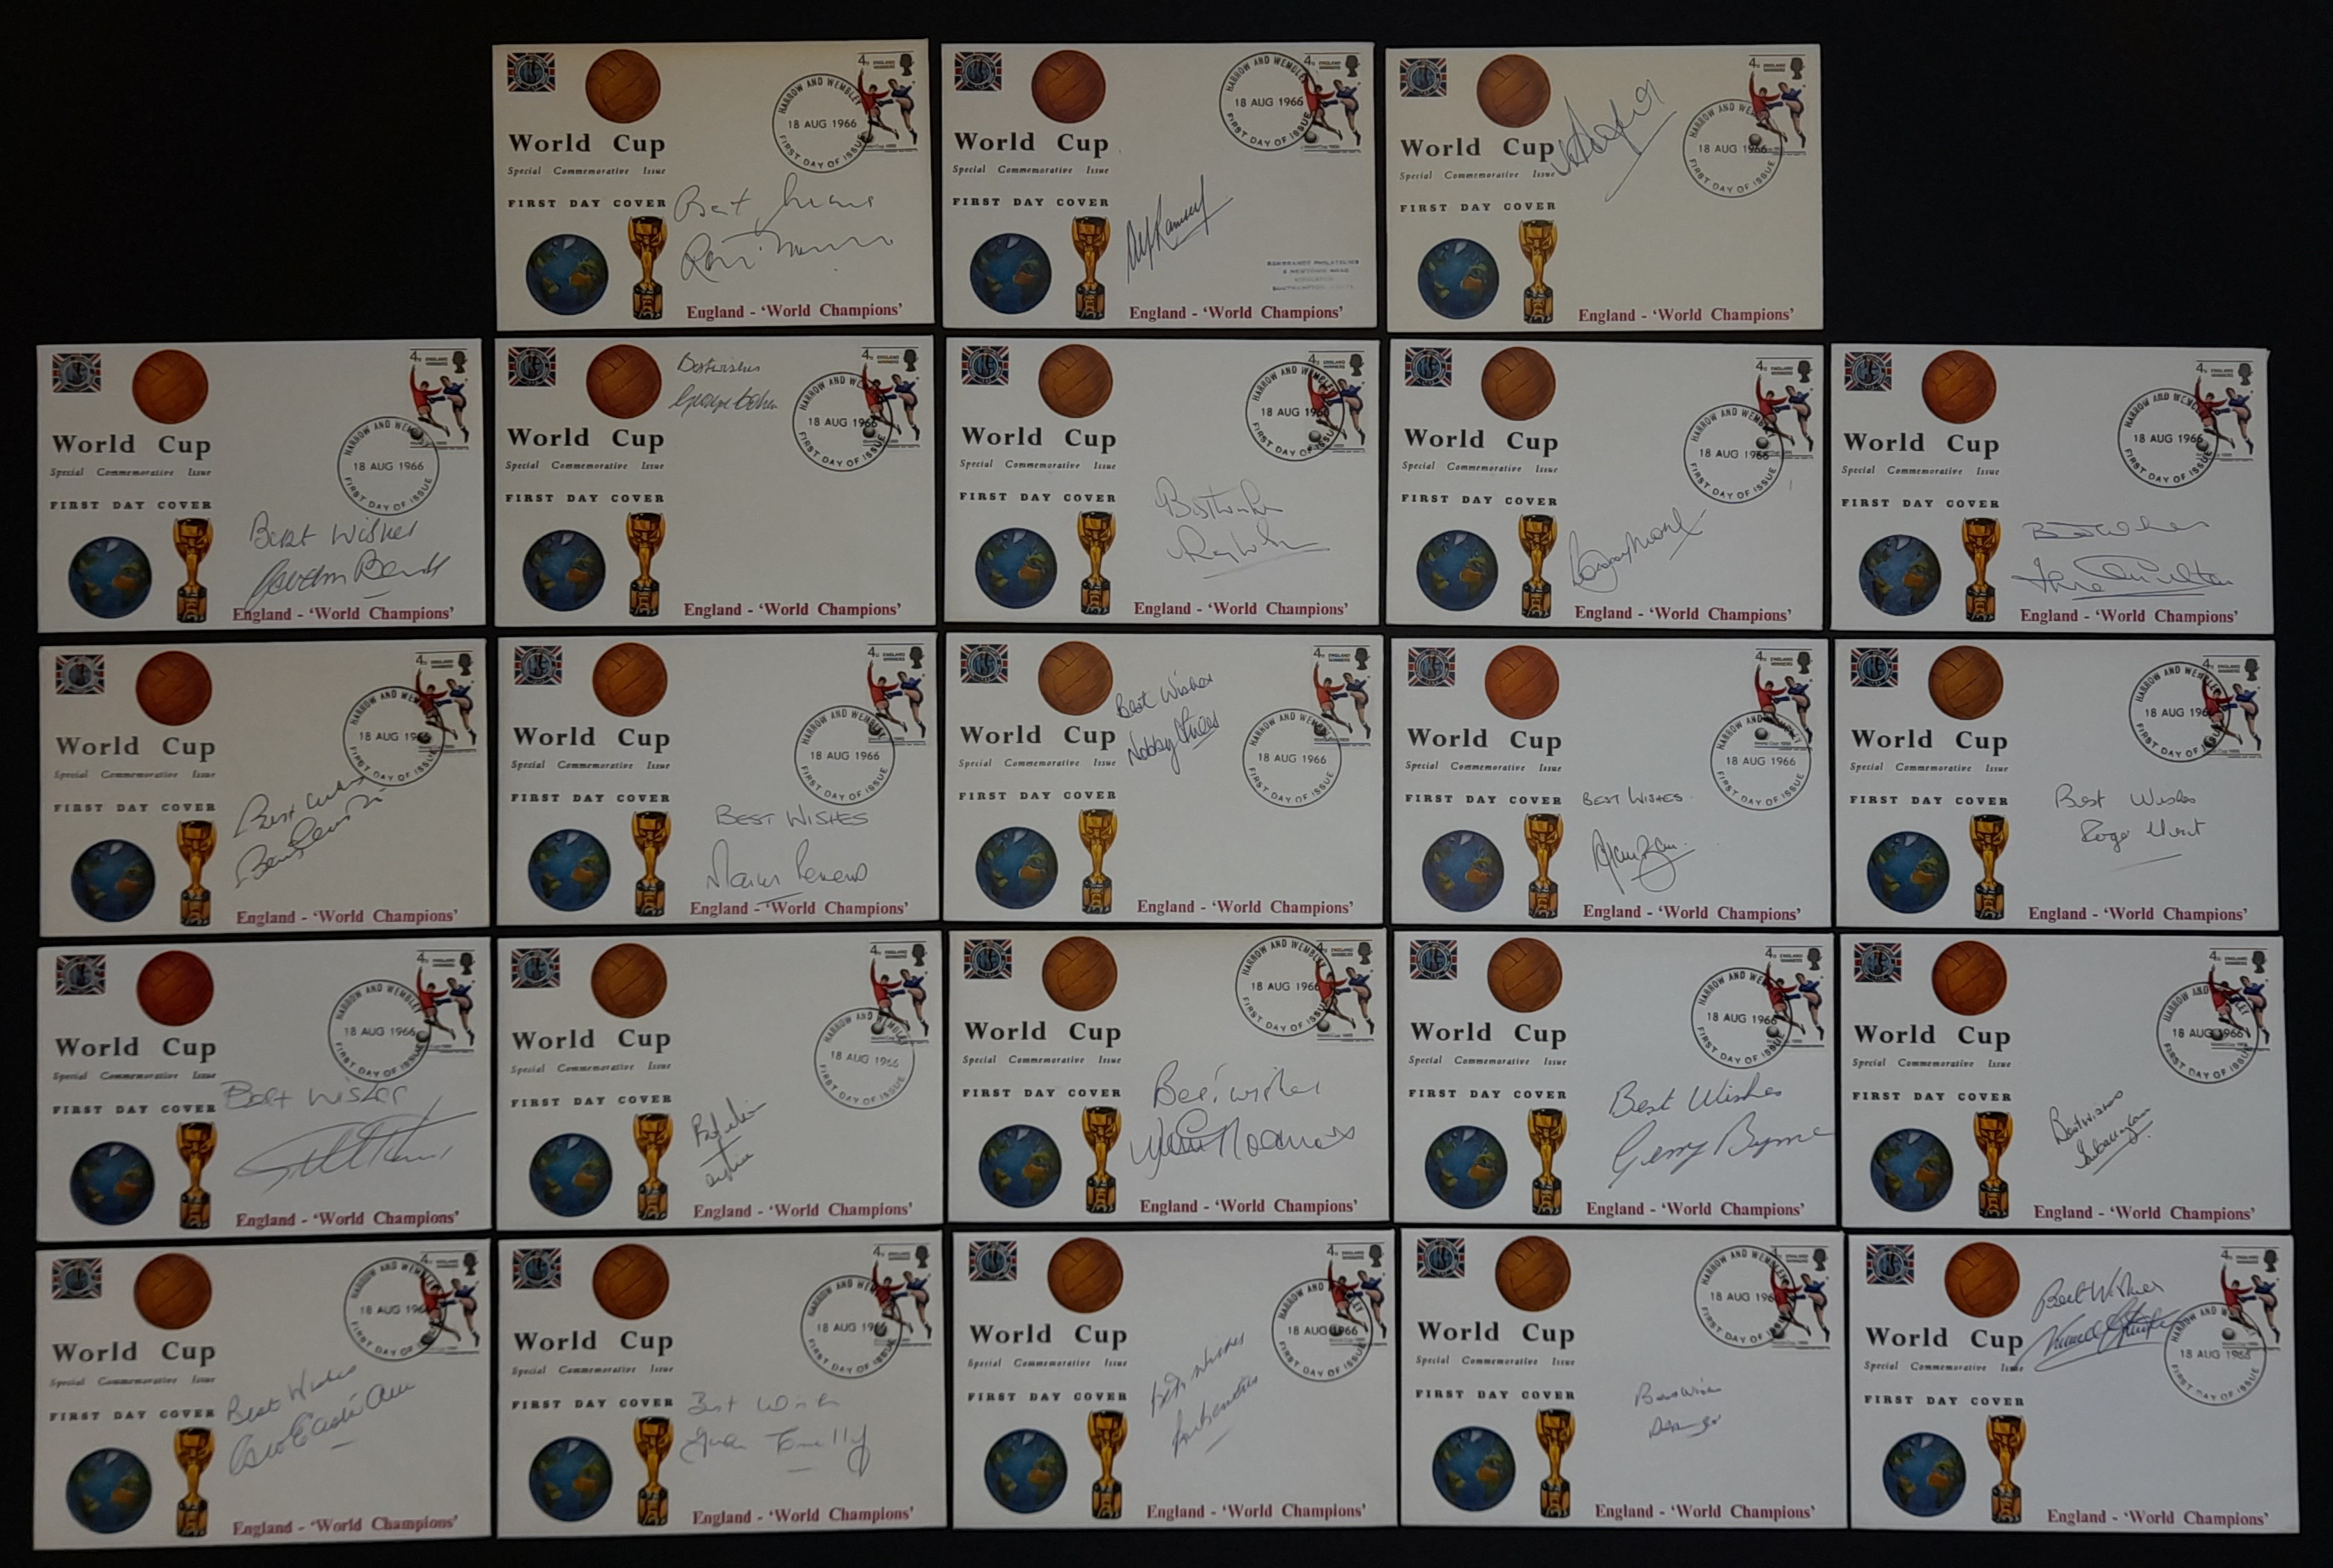 ENGLAND 1966 WORLD CUP WINNERS FULL SET OF 23 AUTOGRAPHED REMBRANDT POSTAL COVERS